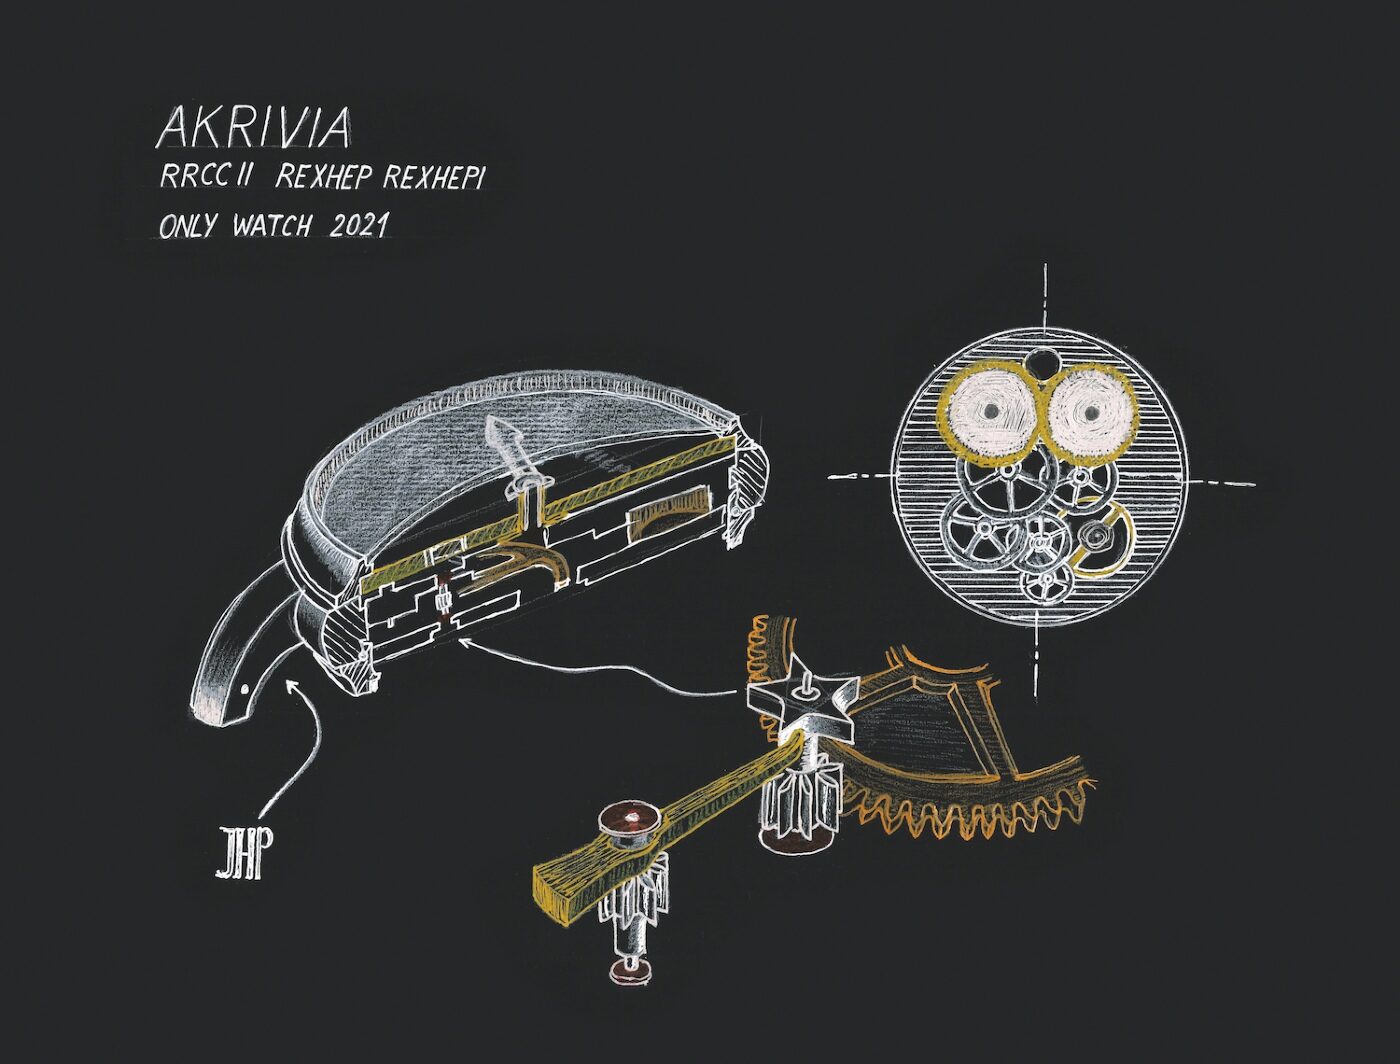 AKRIVIA only watch 2021